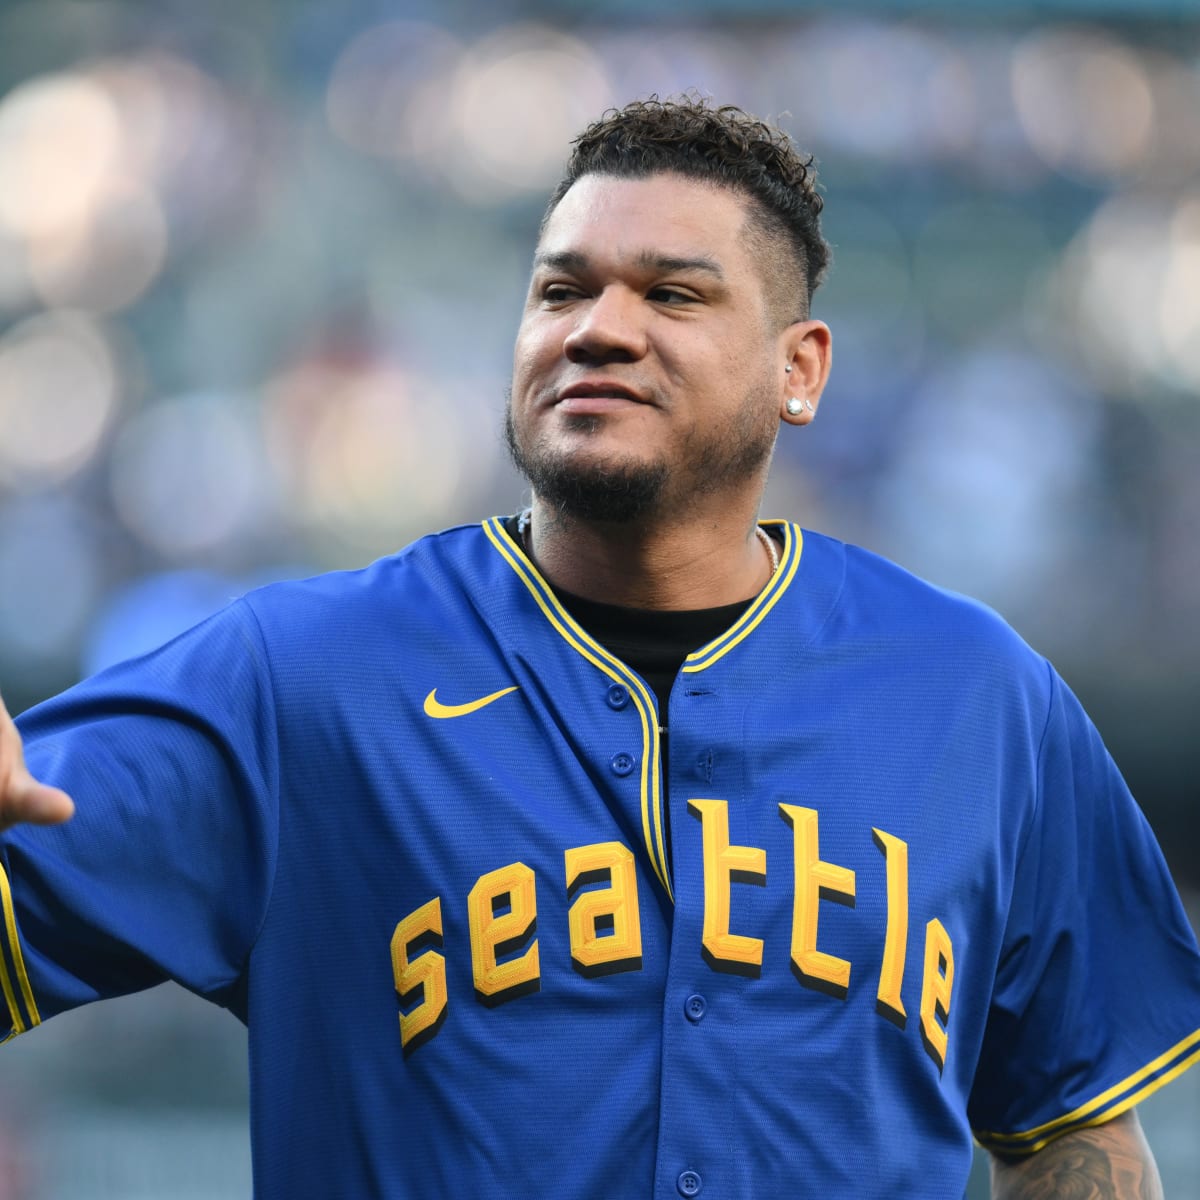 Felix Hernandez to be inducted in Mariners Hall of Fame